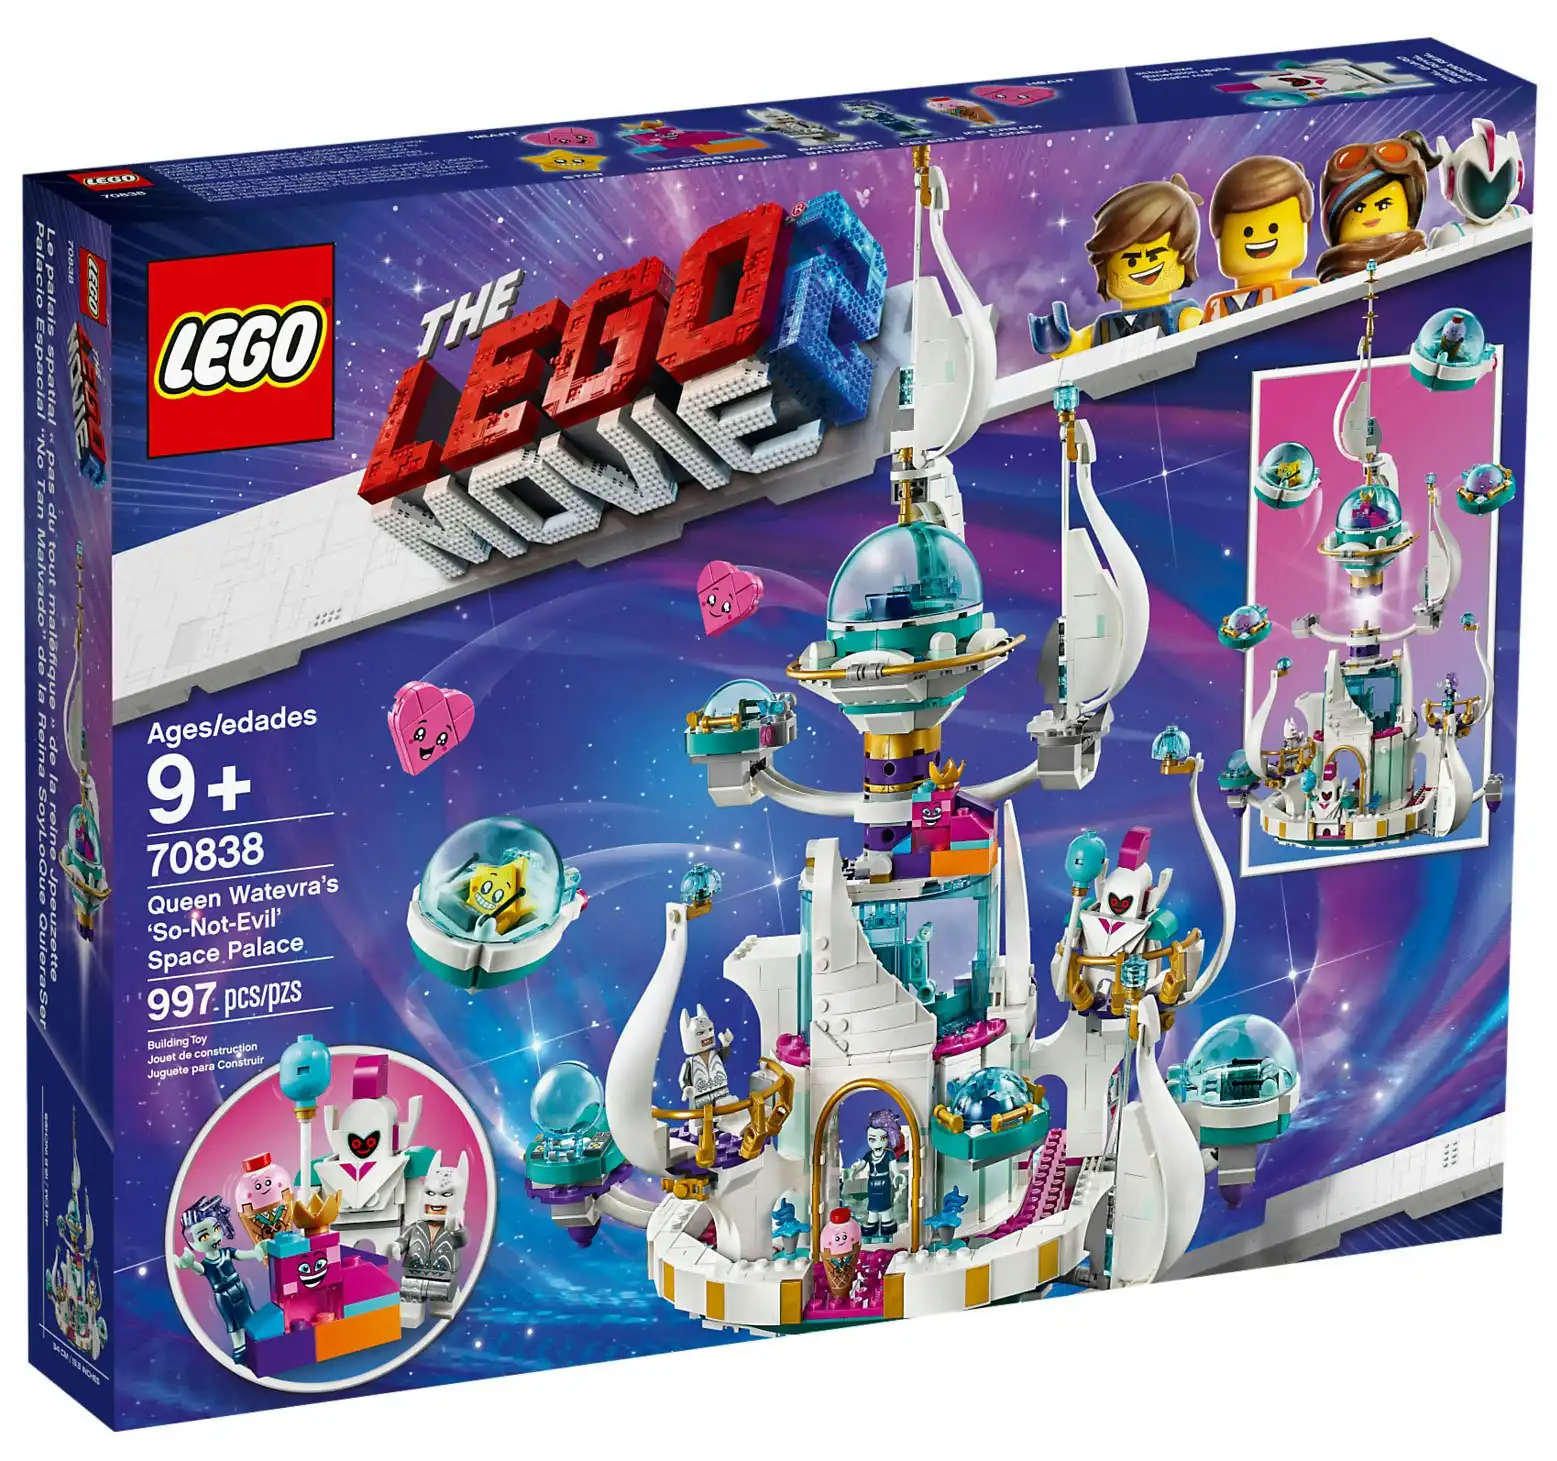 LEGO 70838 Queen Watevra's ‘So-Not-Evil' Space Palace - THE LEGO MOVIE 2